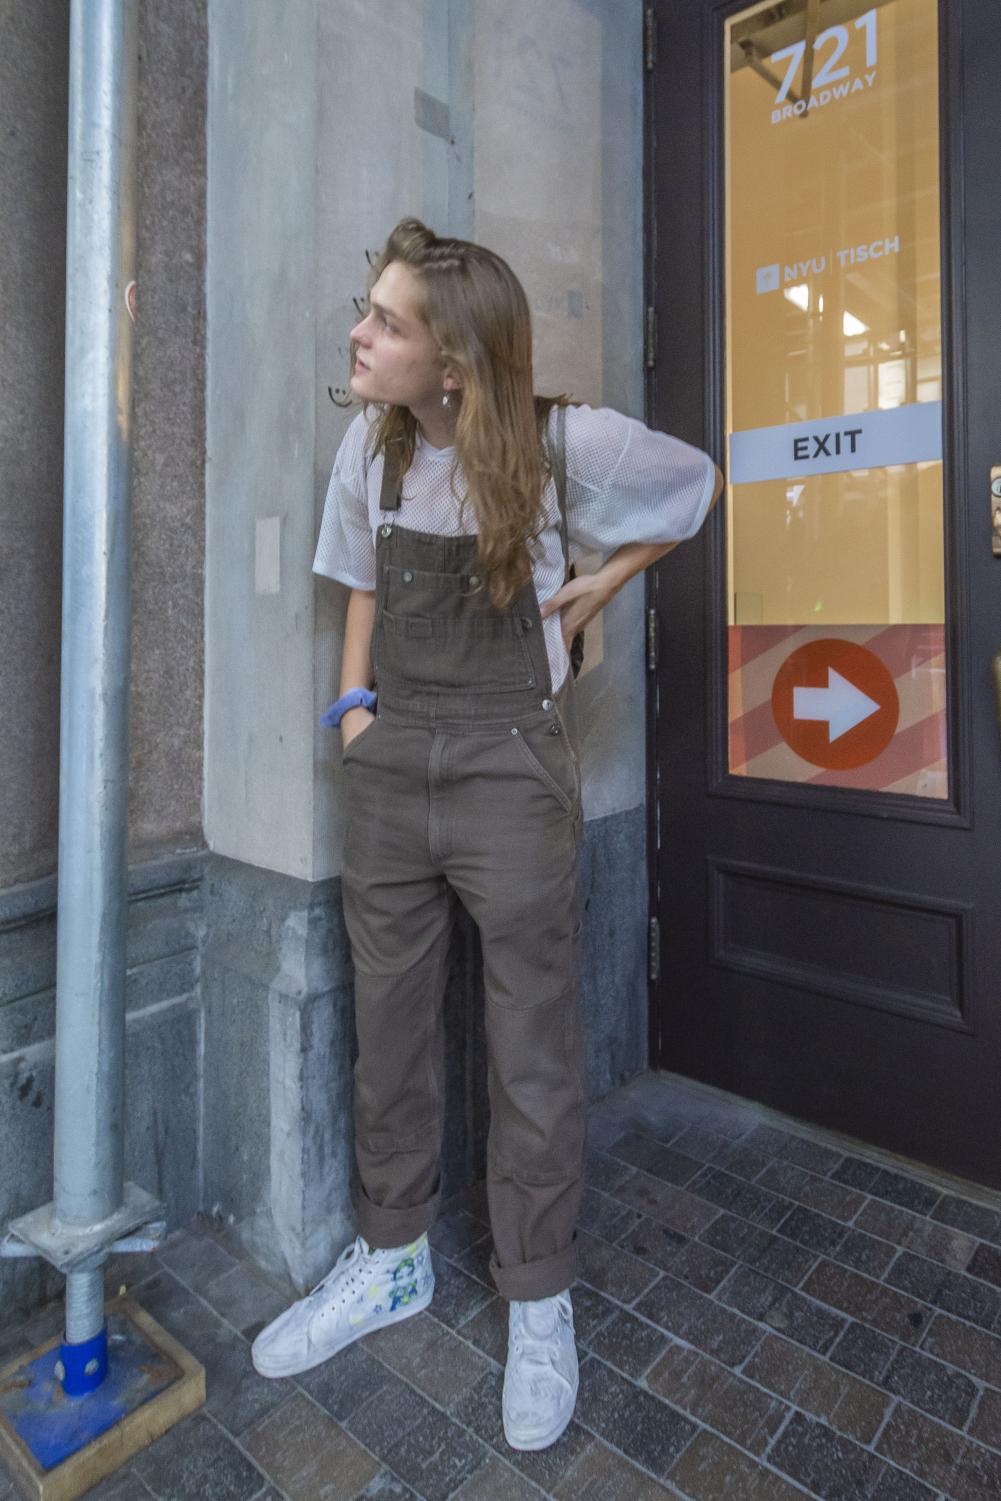 Rowan Trowbridge-Wheeler stands in front of a Tisch building looking away from the camera. Trowbridge-Wheeler is wearing a white mesh t-shirt with brown overalls.